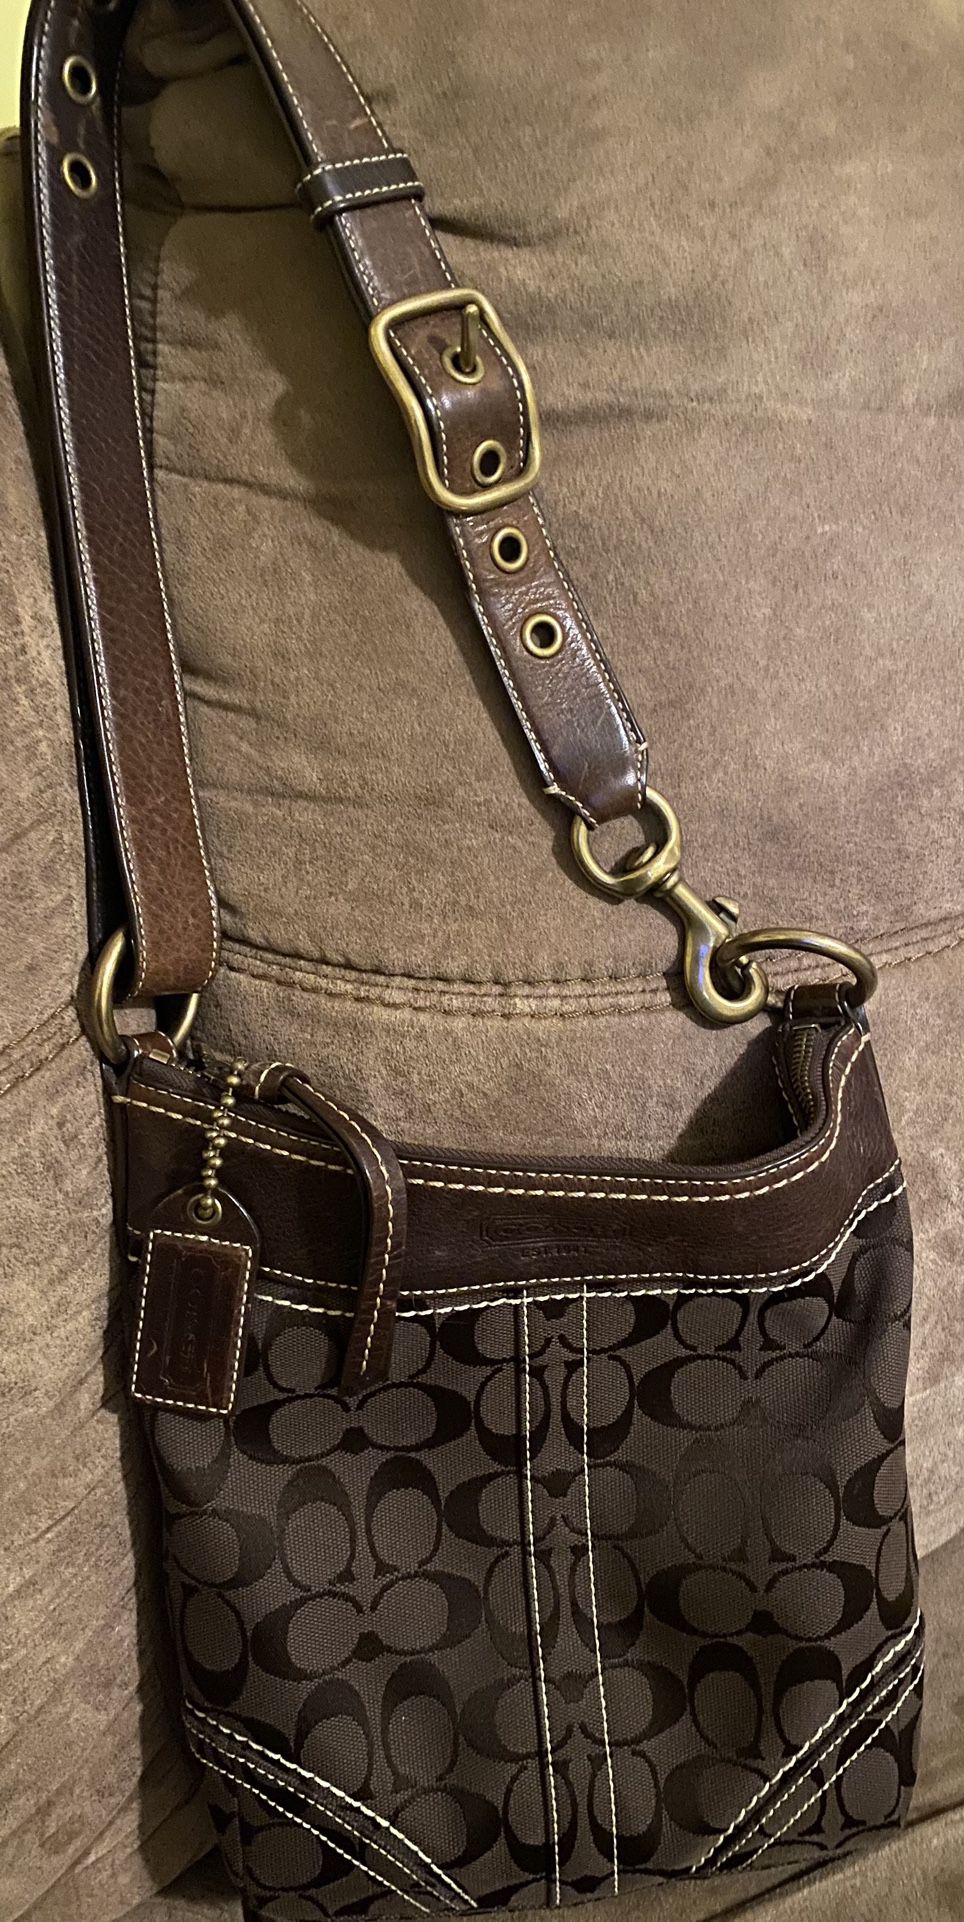 COACH Crossbody Brown purse,used but in excellent condition! Brass buckle w/ strap